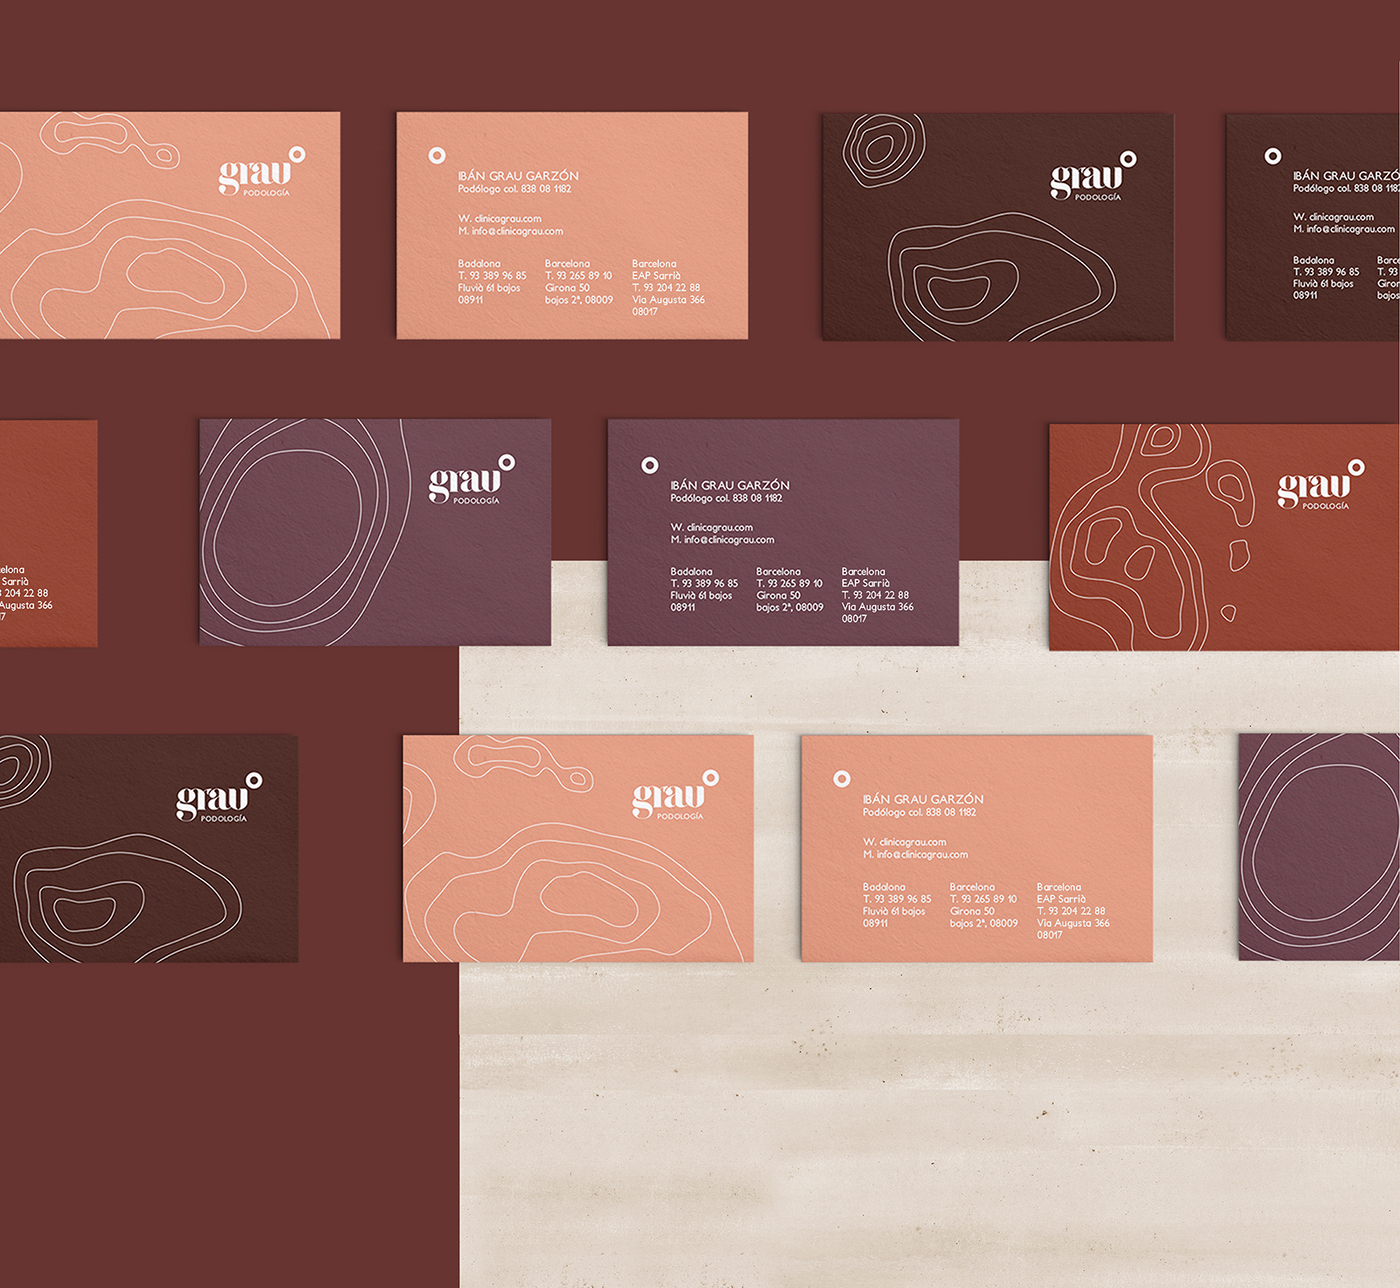 Health zen ground Soft Colors Web flyer Business Cards cards grau clinica ArtDirection marcas brand graphic Website